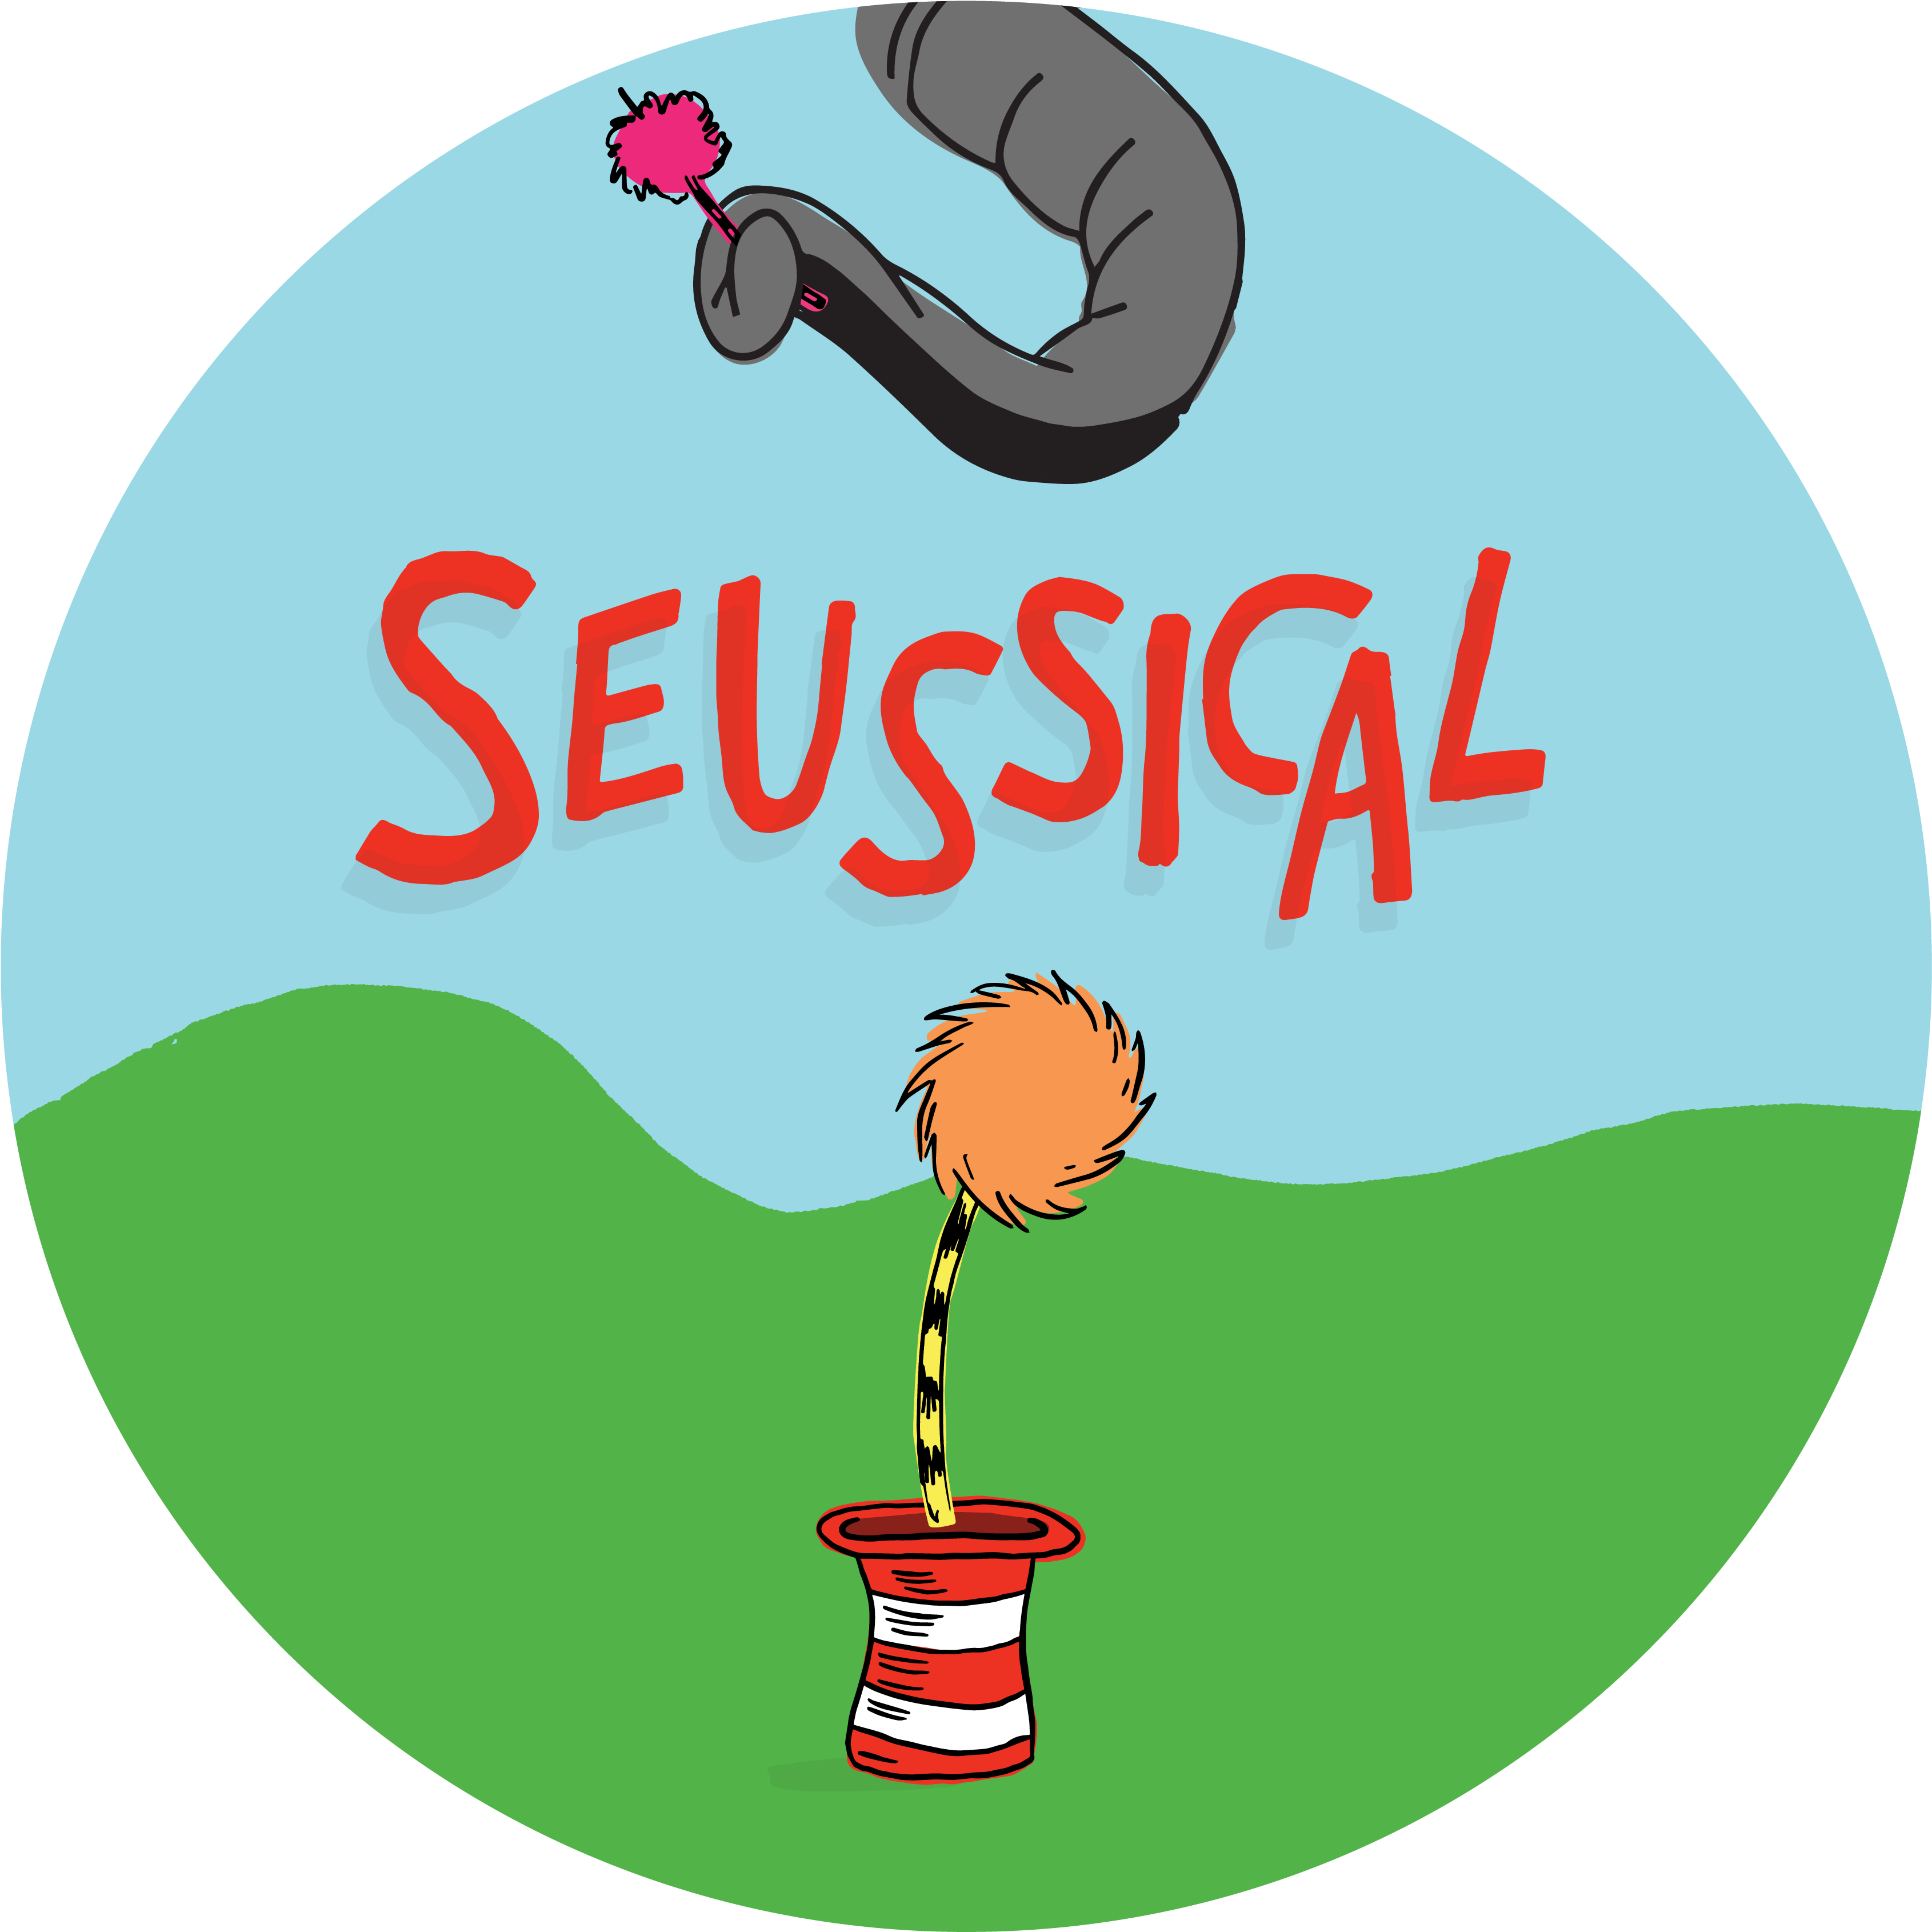 Seussical Presented By C&j Bus Lines - New Hampshire (3396x3405)